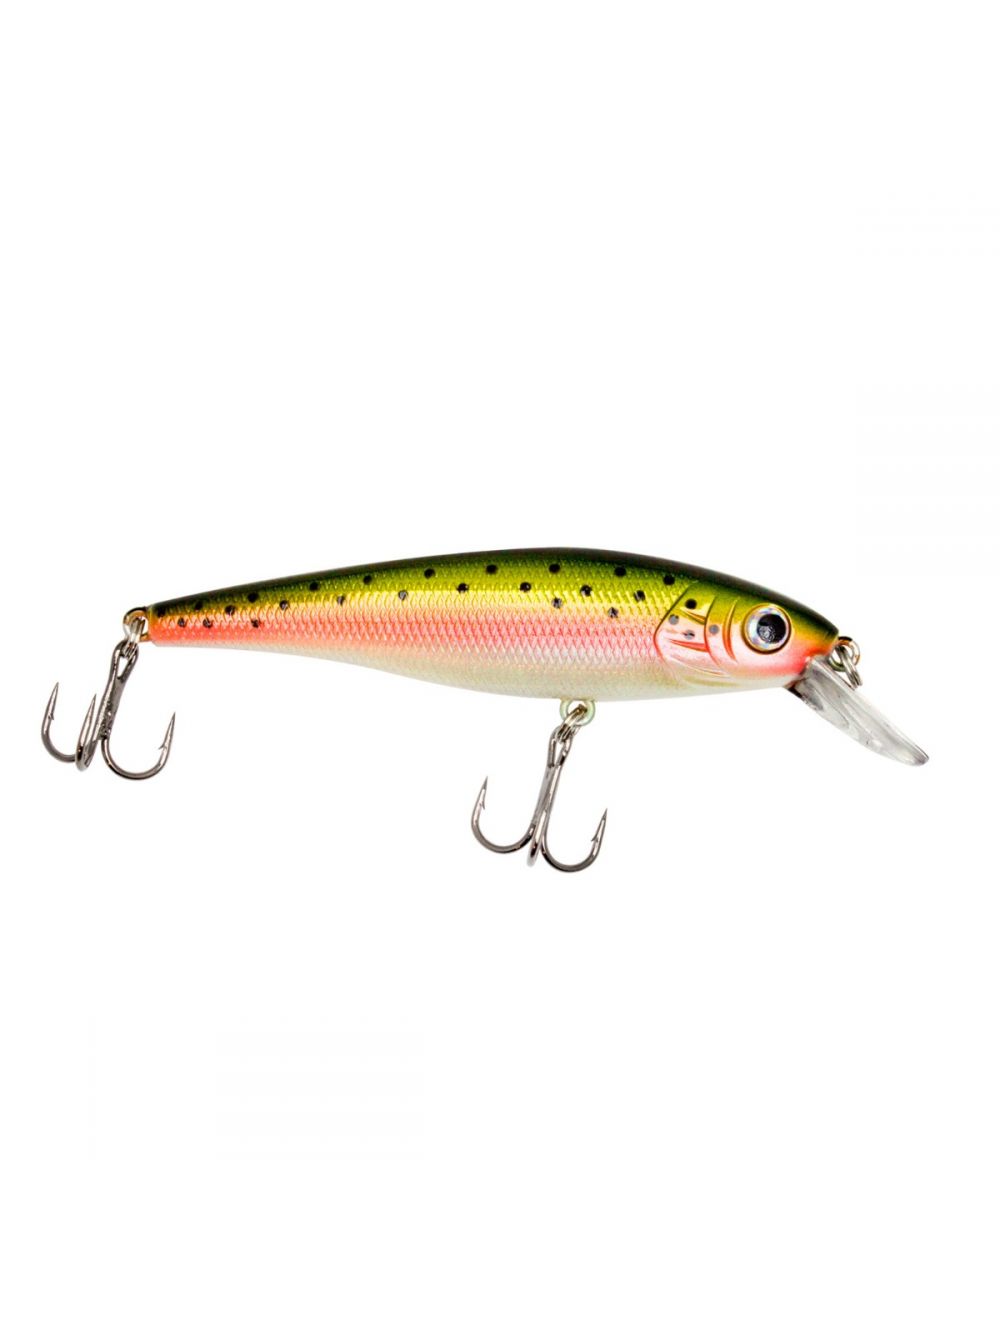 Trout Magnet Trout Crank Fishing Lure, Rainbow, 2.5